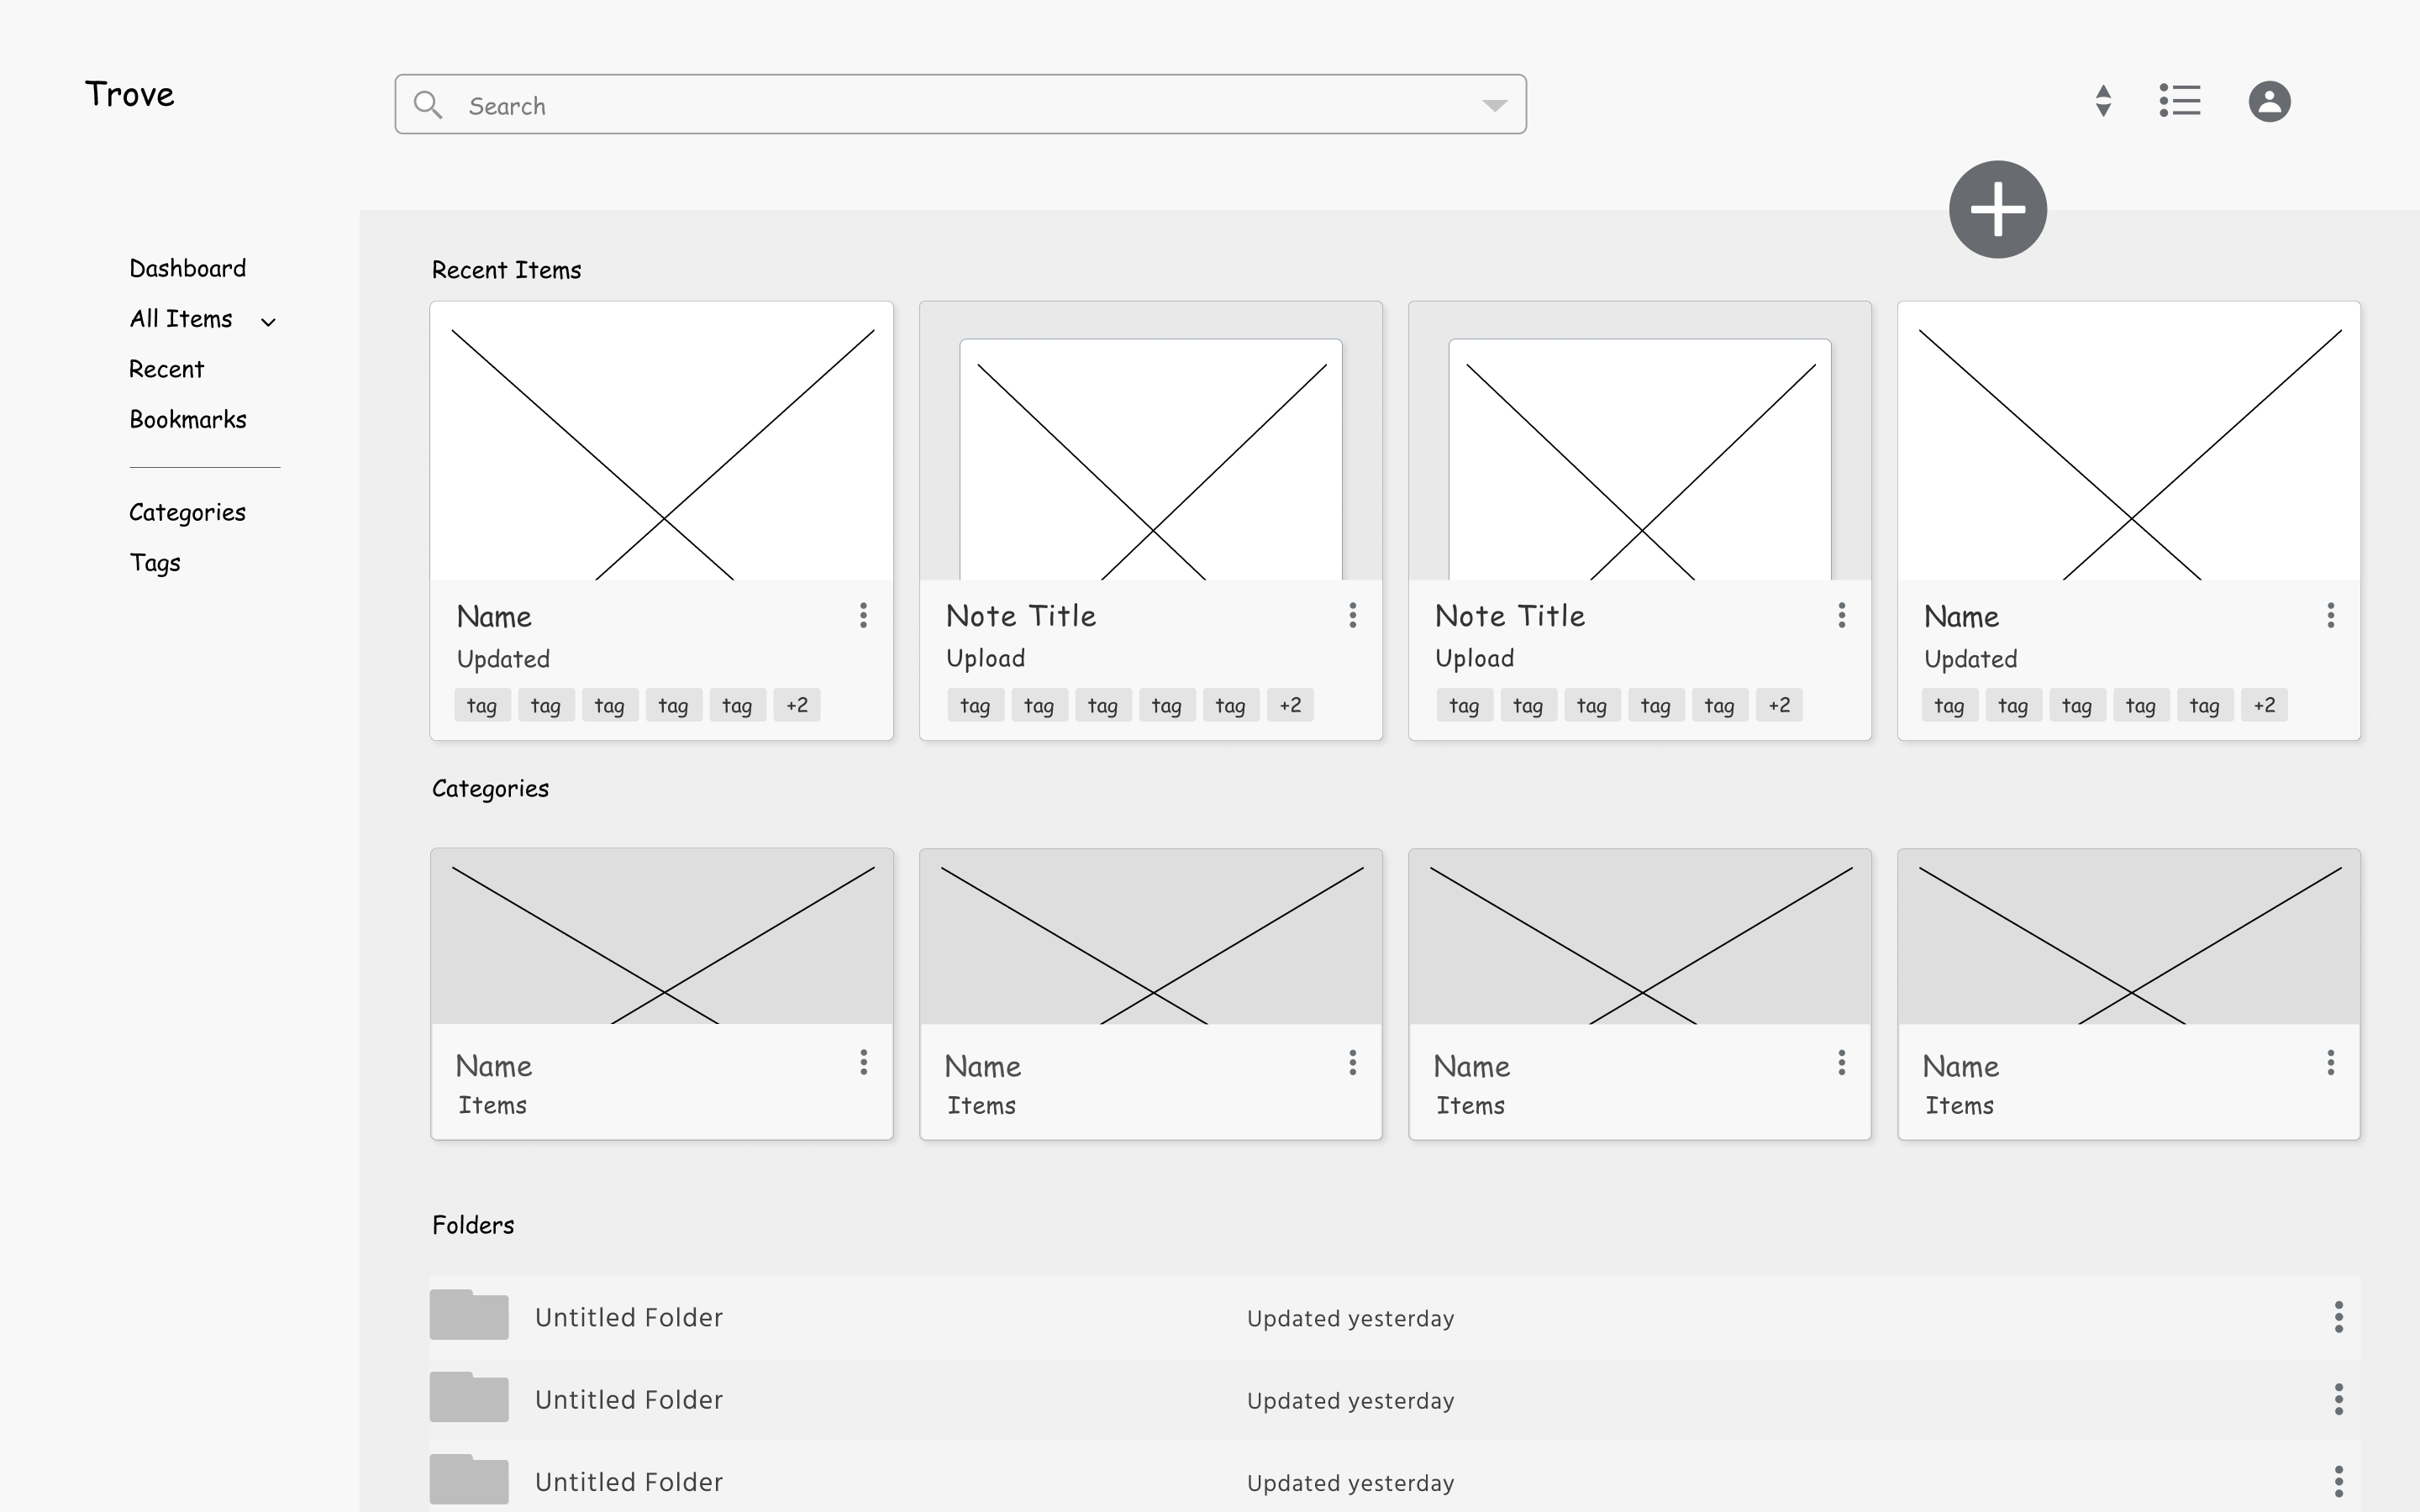 Low fidelity wireframe of dashboard with categories added